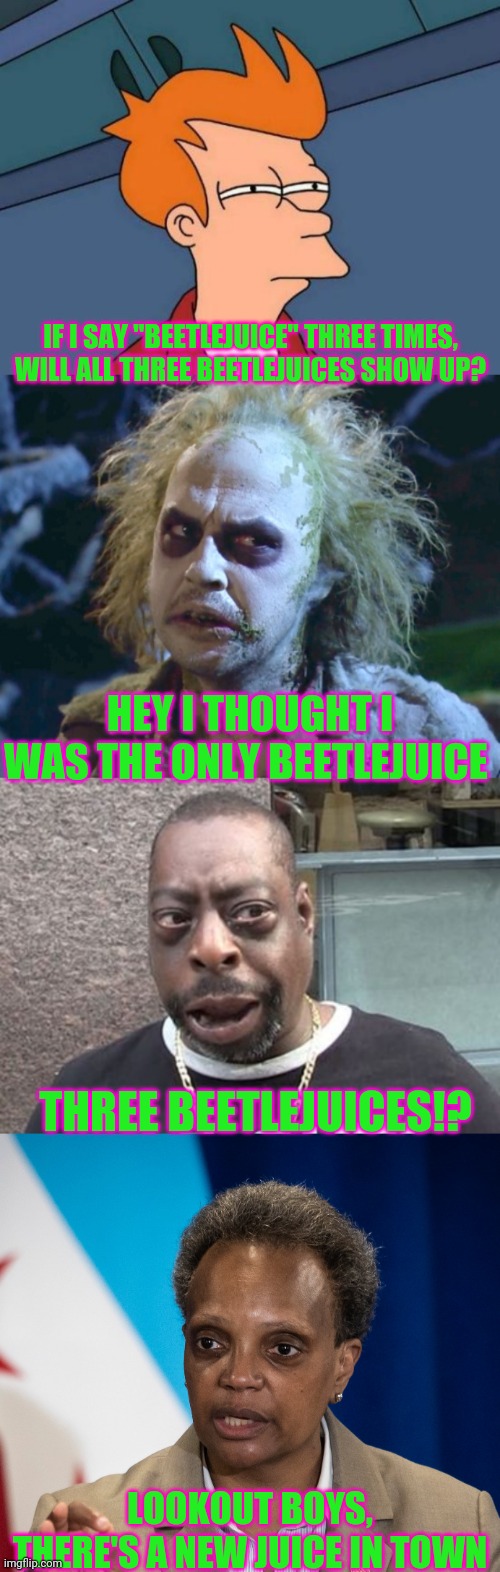 IF I SAY "BEETLEJUICE" THREE TIMES, WILL ALL THREE BEETLEJUICES SHOW UP? HEY I THOUGHT I WAS THE ONLY BEETLEJUICE; THREE BEETLEJUICES!? LOOKOUT BOYS, THERE'S A NEW JUICE IN TOWN | image tagged in memes,futurama fry | made w/ Imgflip meme maker